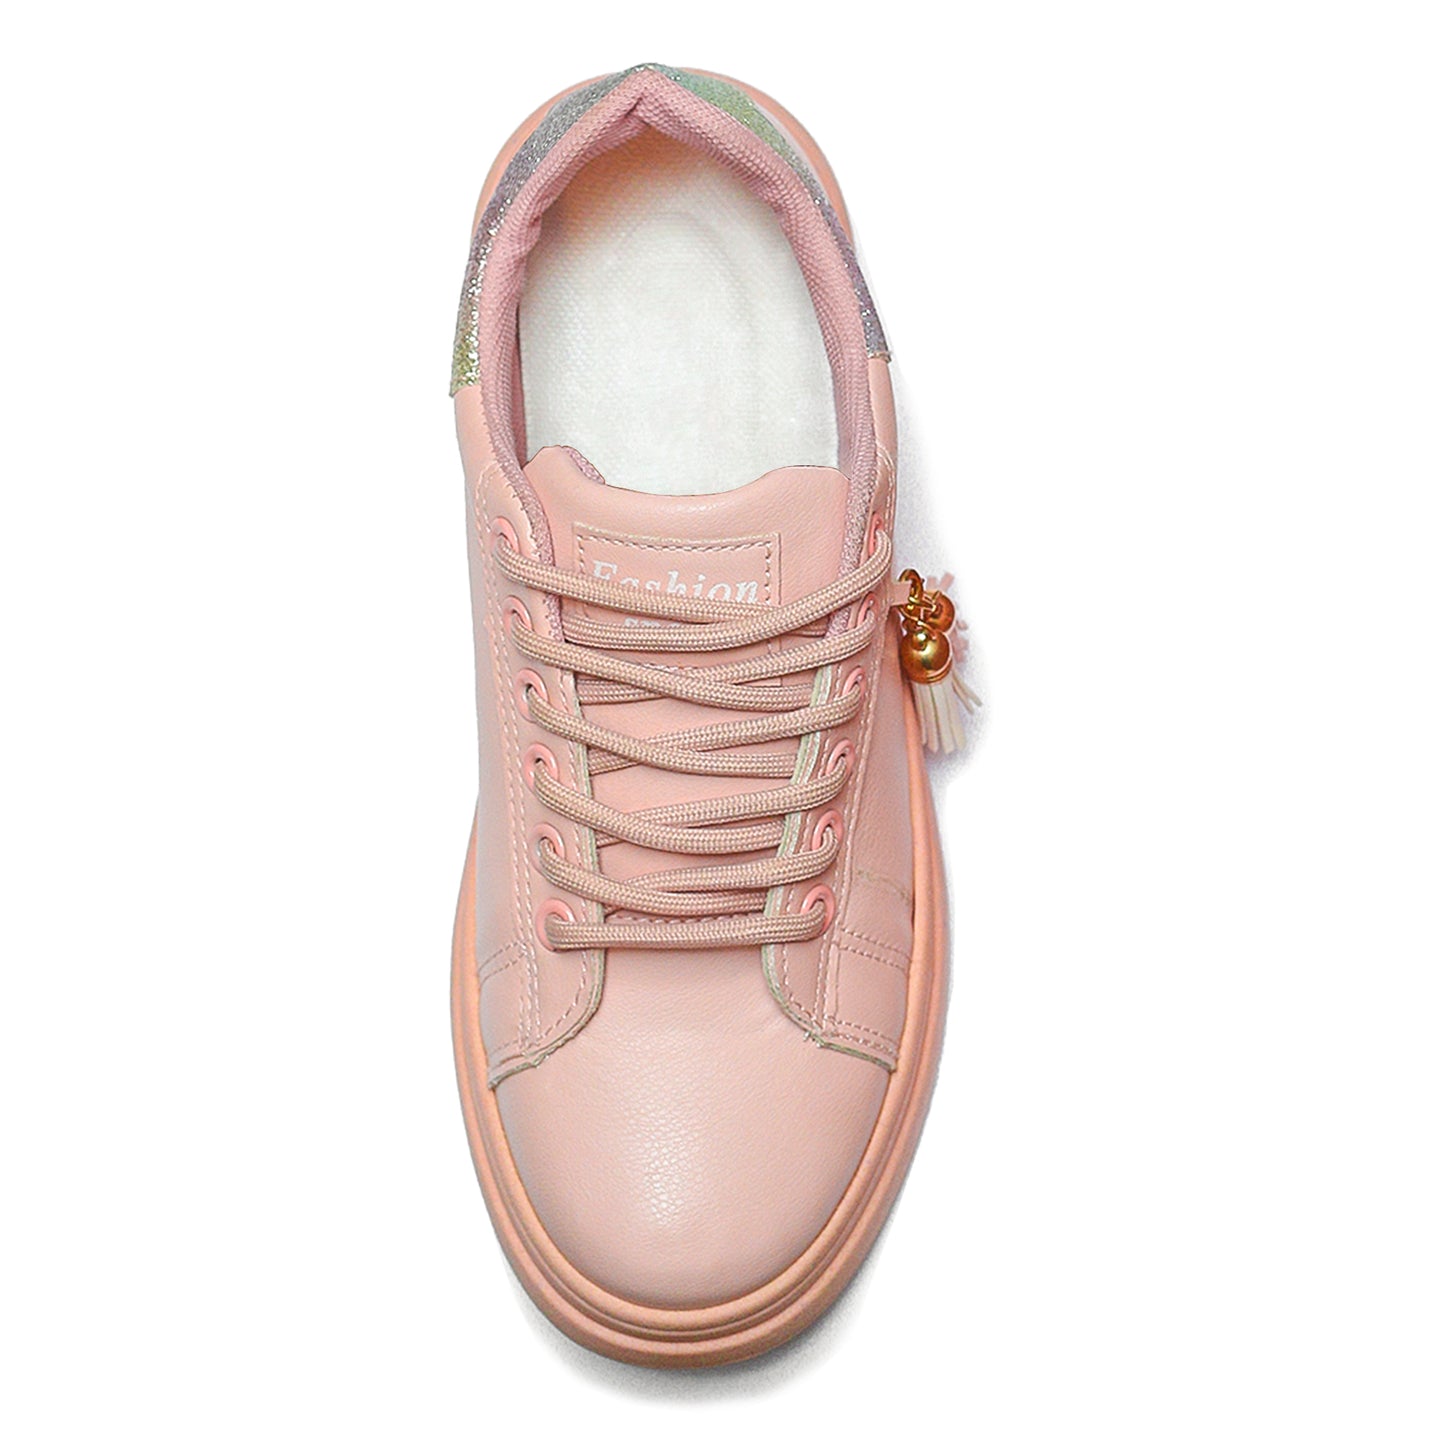 Simple Pink Sneakers For Girls